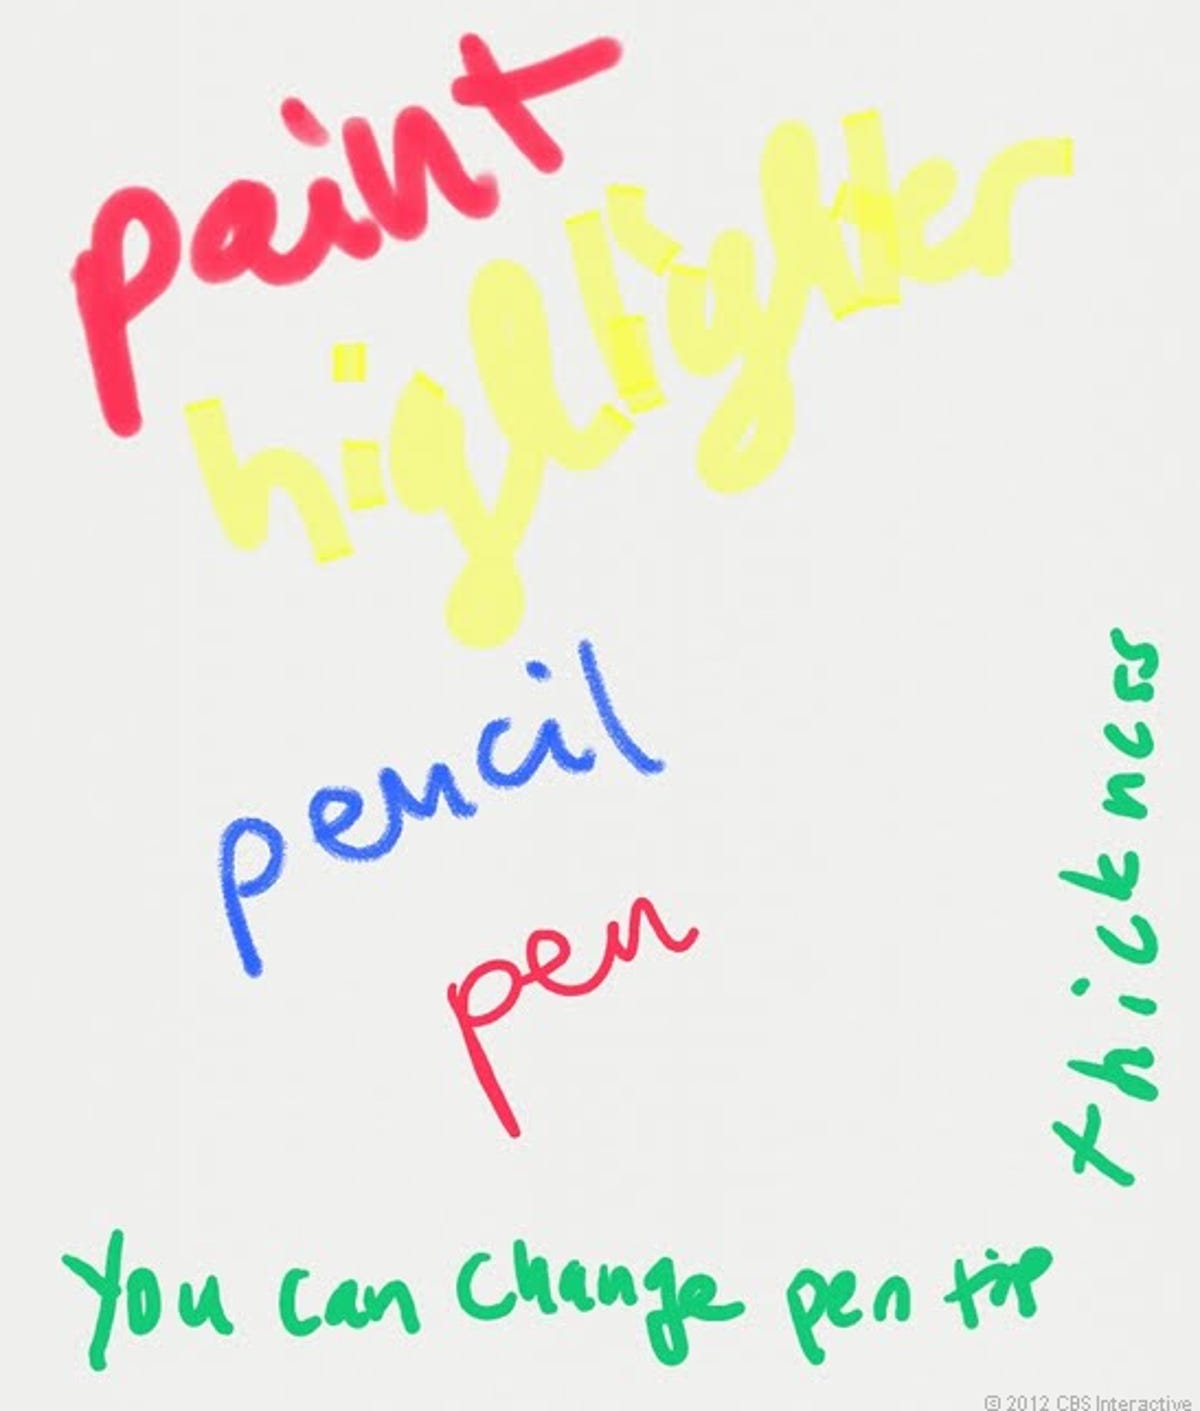 GalaxyNote_Stylus-pen-tips.png